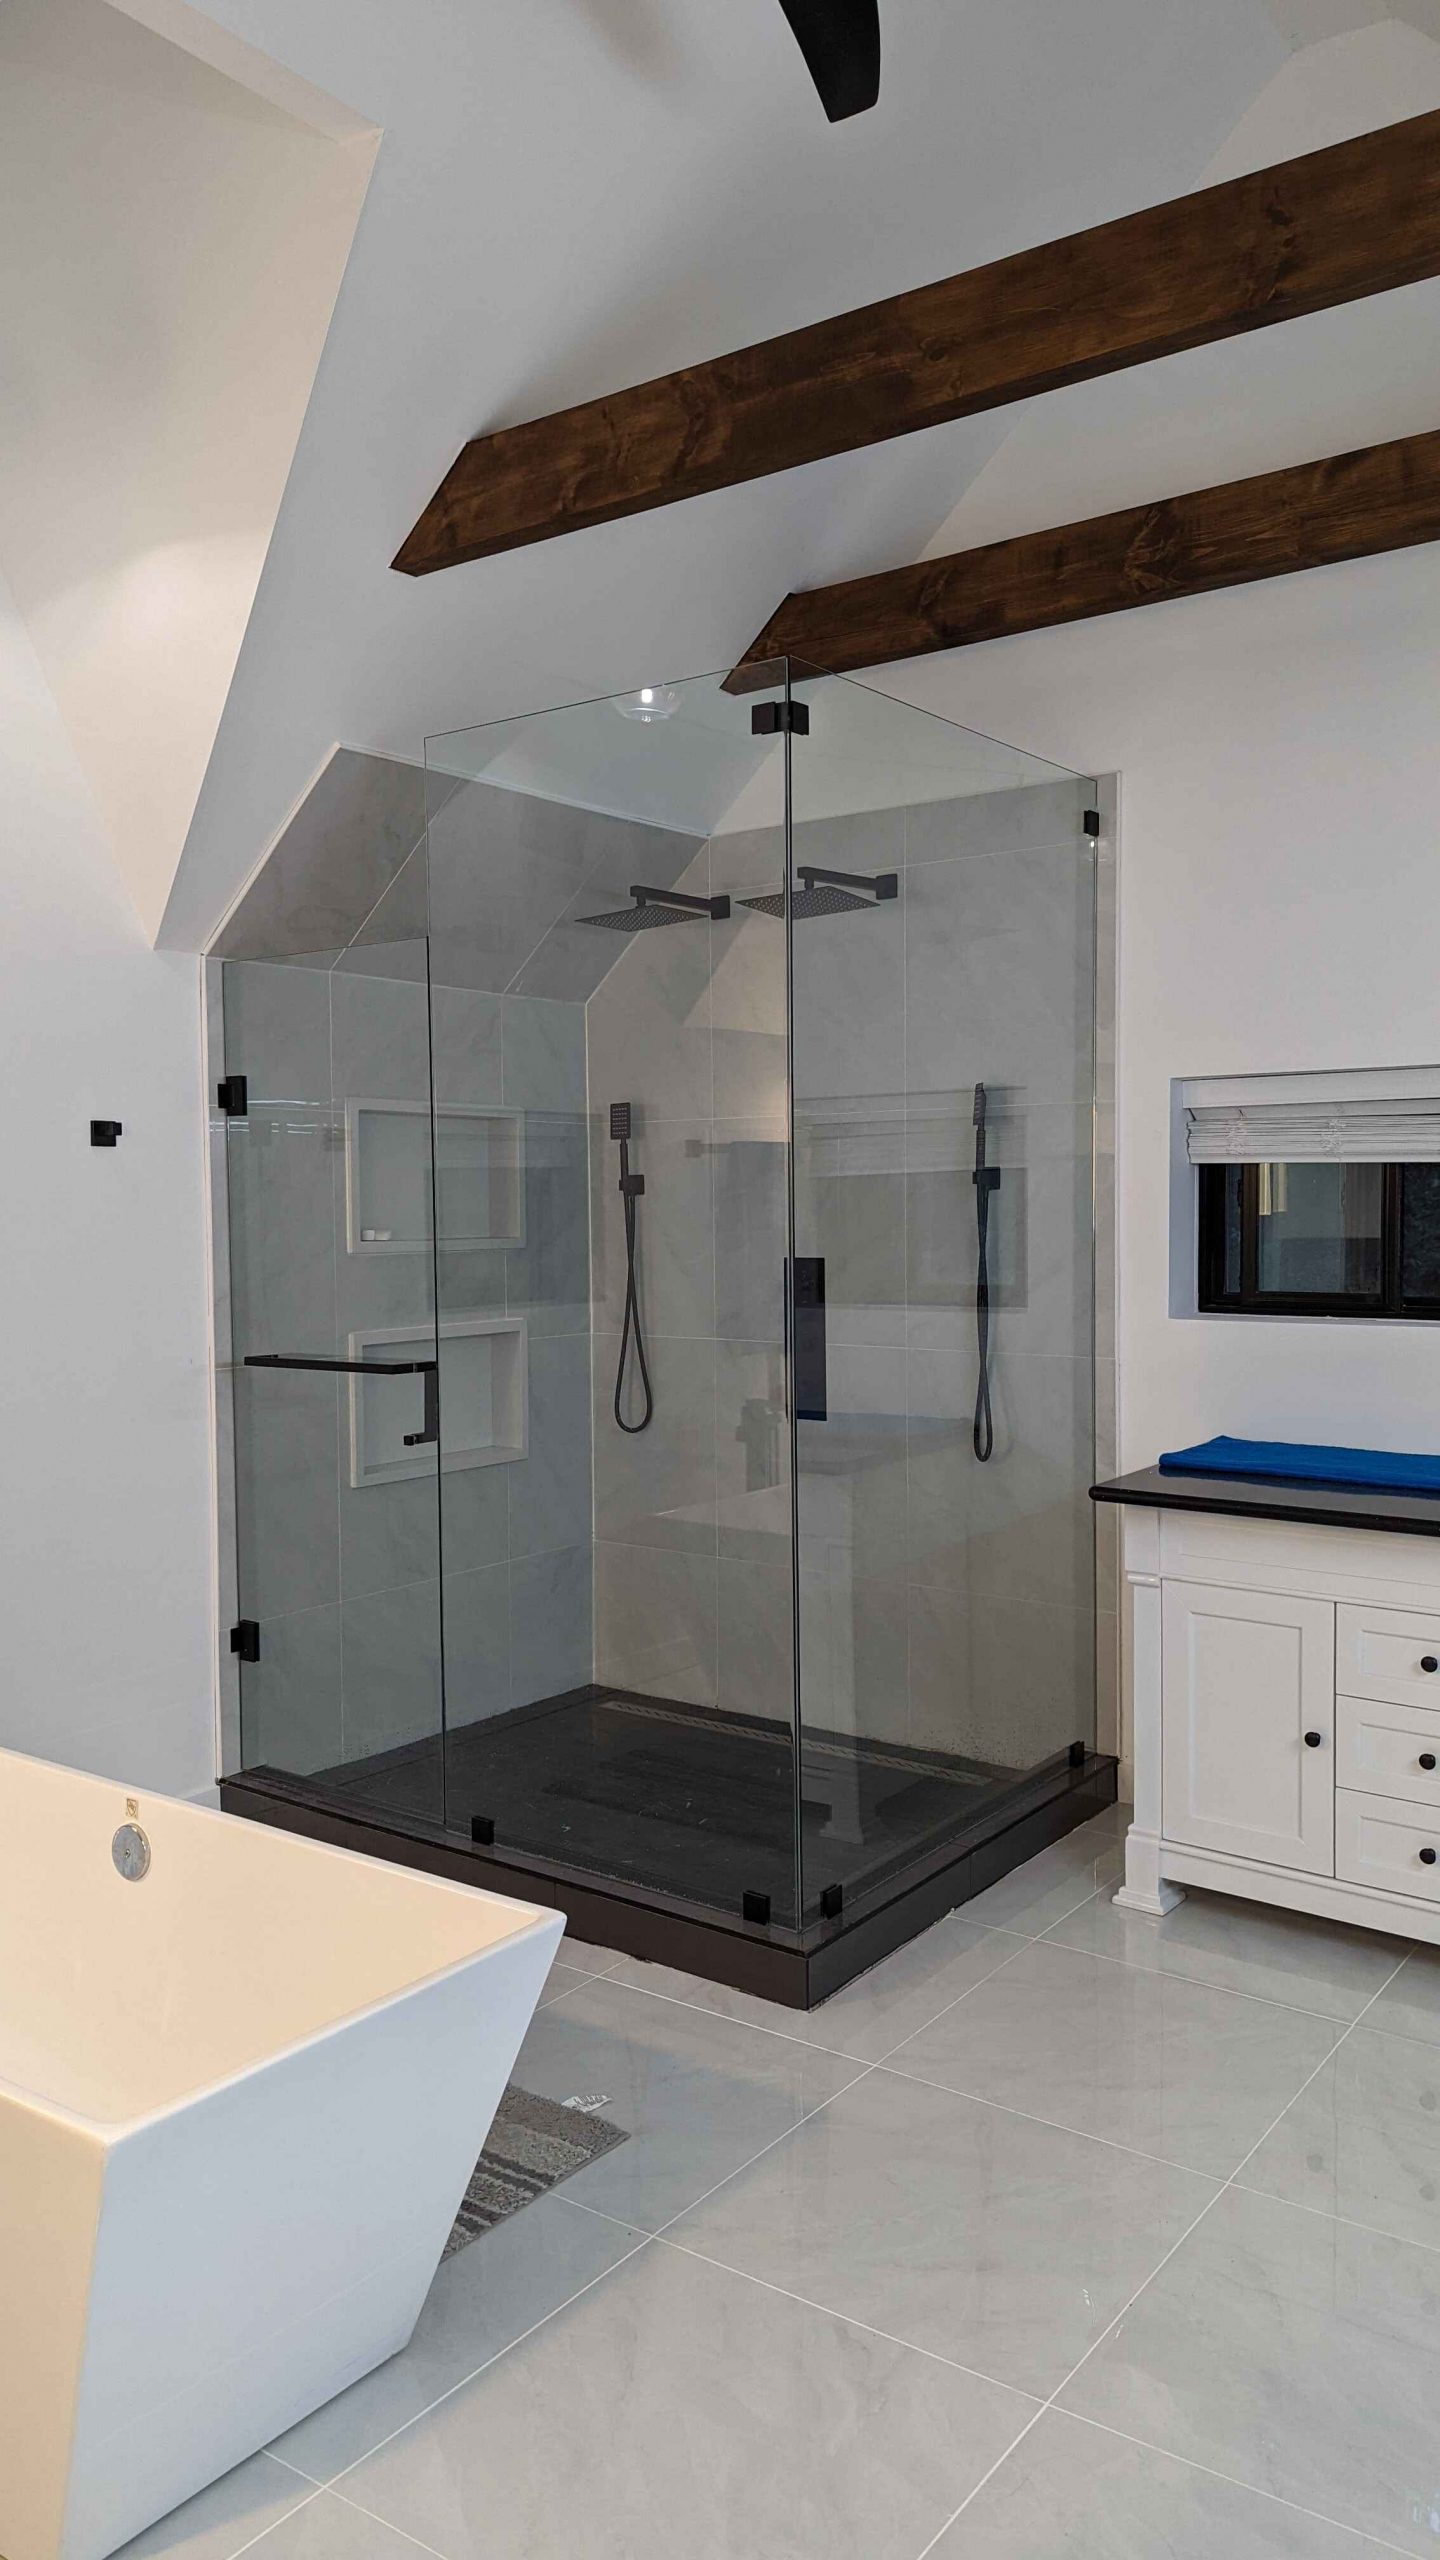 Why are frameless glass shower enclosures popular in Canada? What are the costs involved?